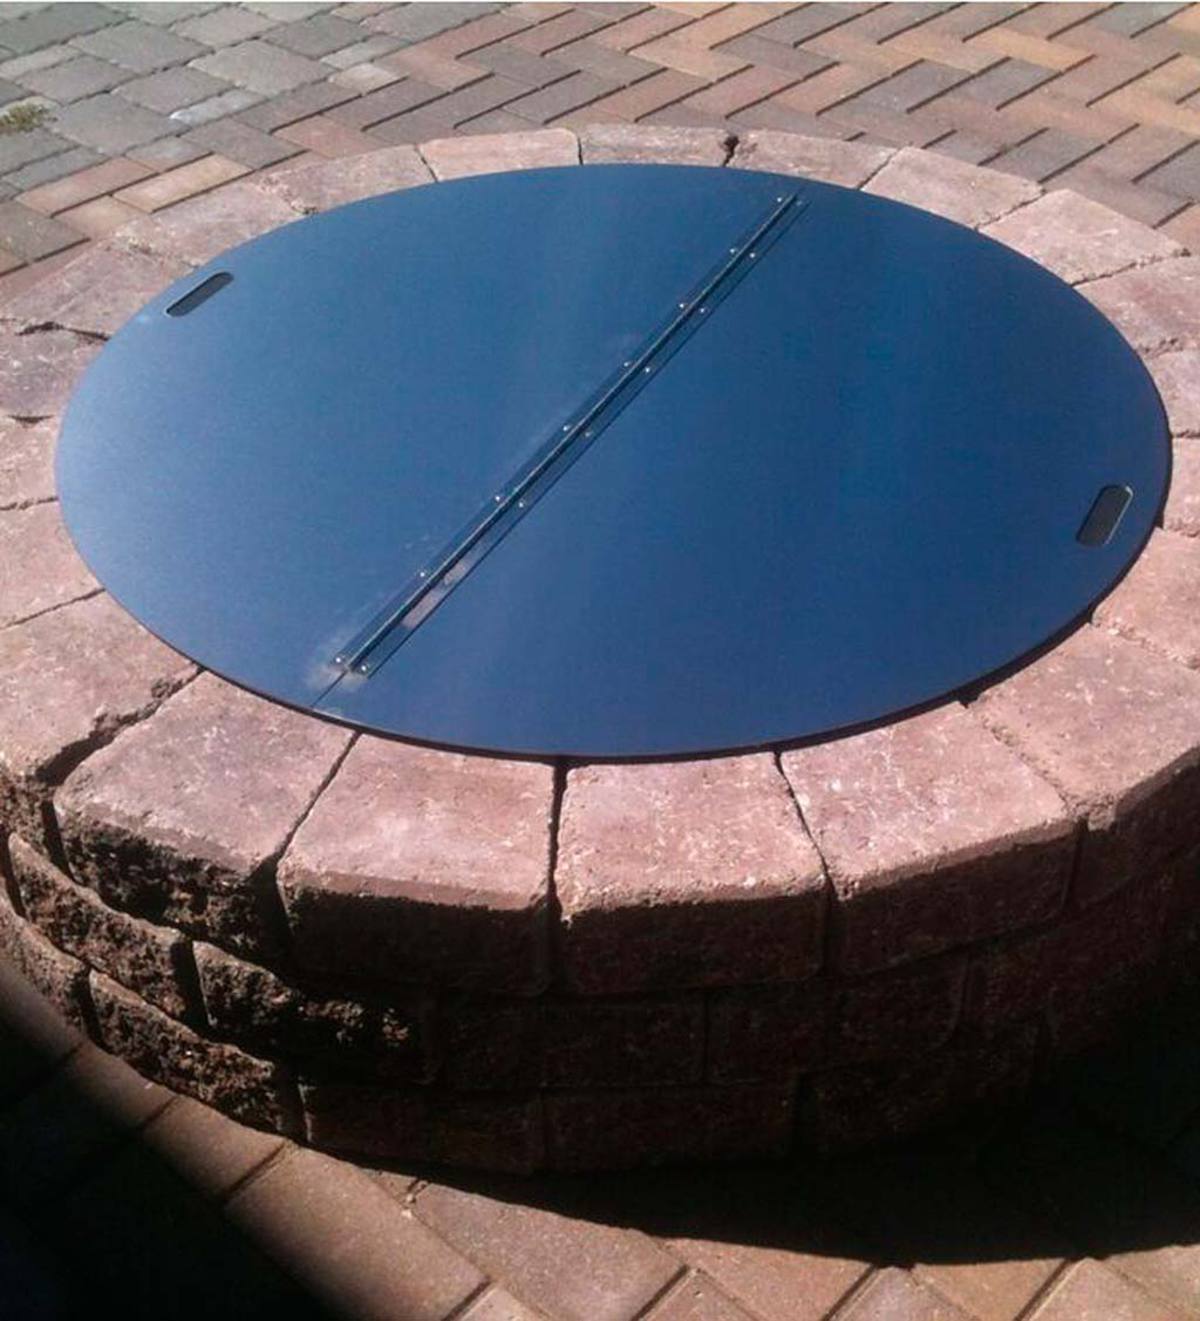 Stainless Steel Round Fire Pit Cover, 32 Inch Round Fire Pit Cover